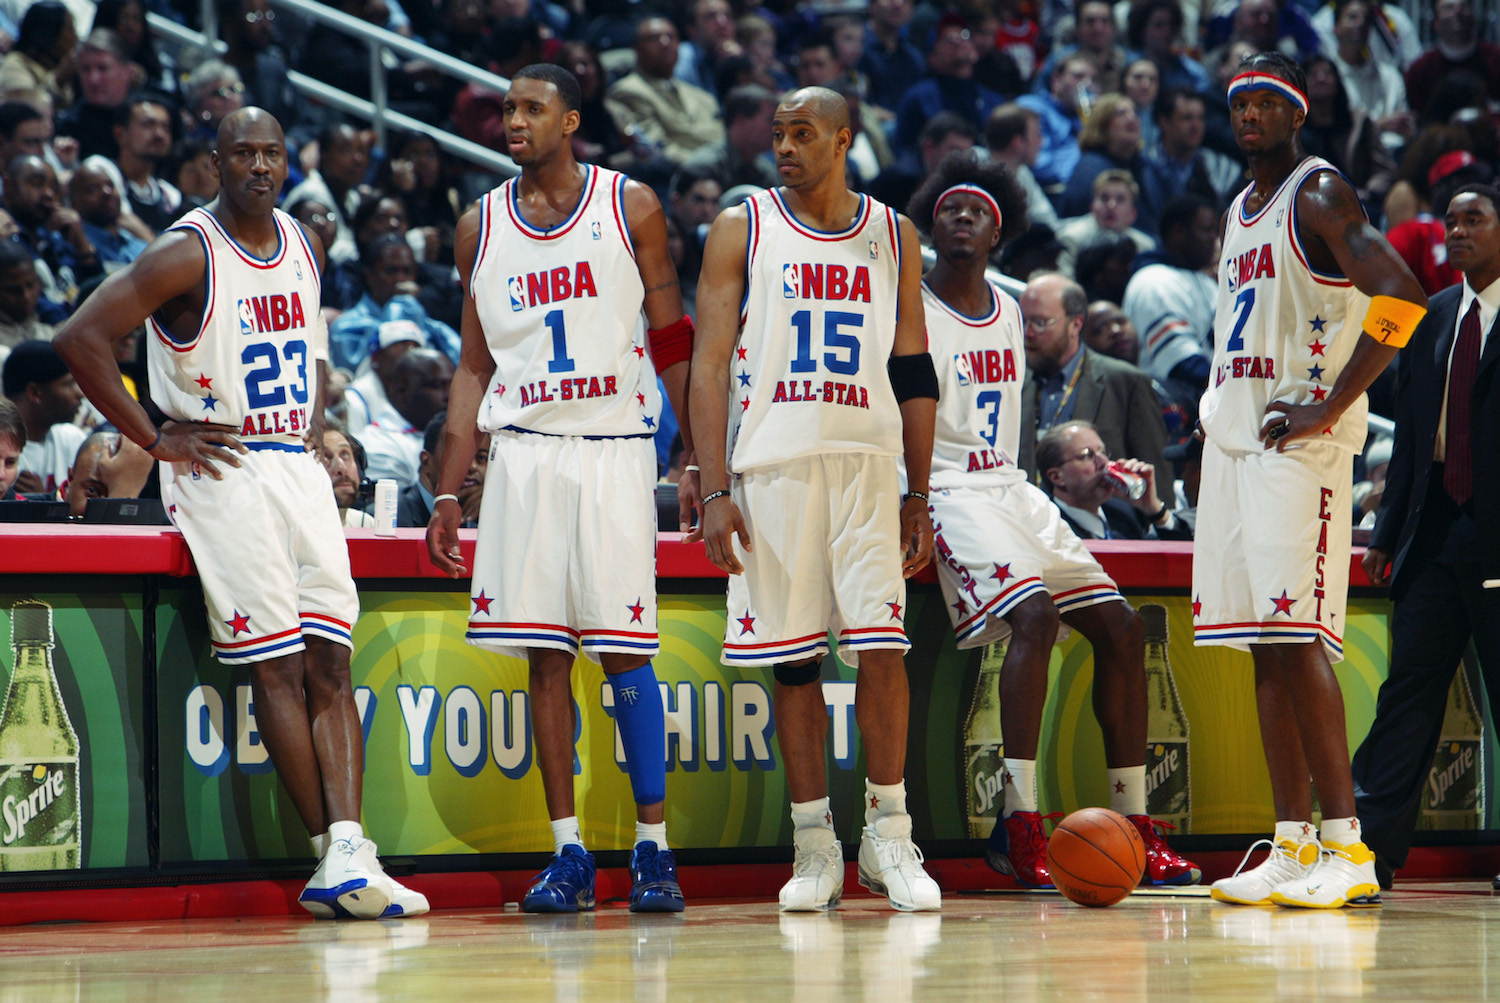 Michael Jordan and Vince Carter stand together as members of the 2003 NBA Eastern Conference All-Star team.